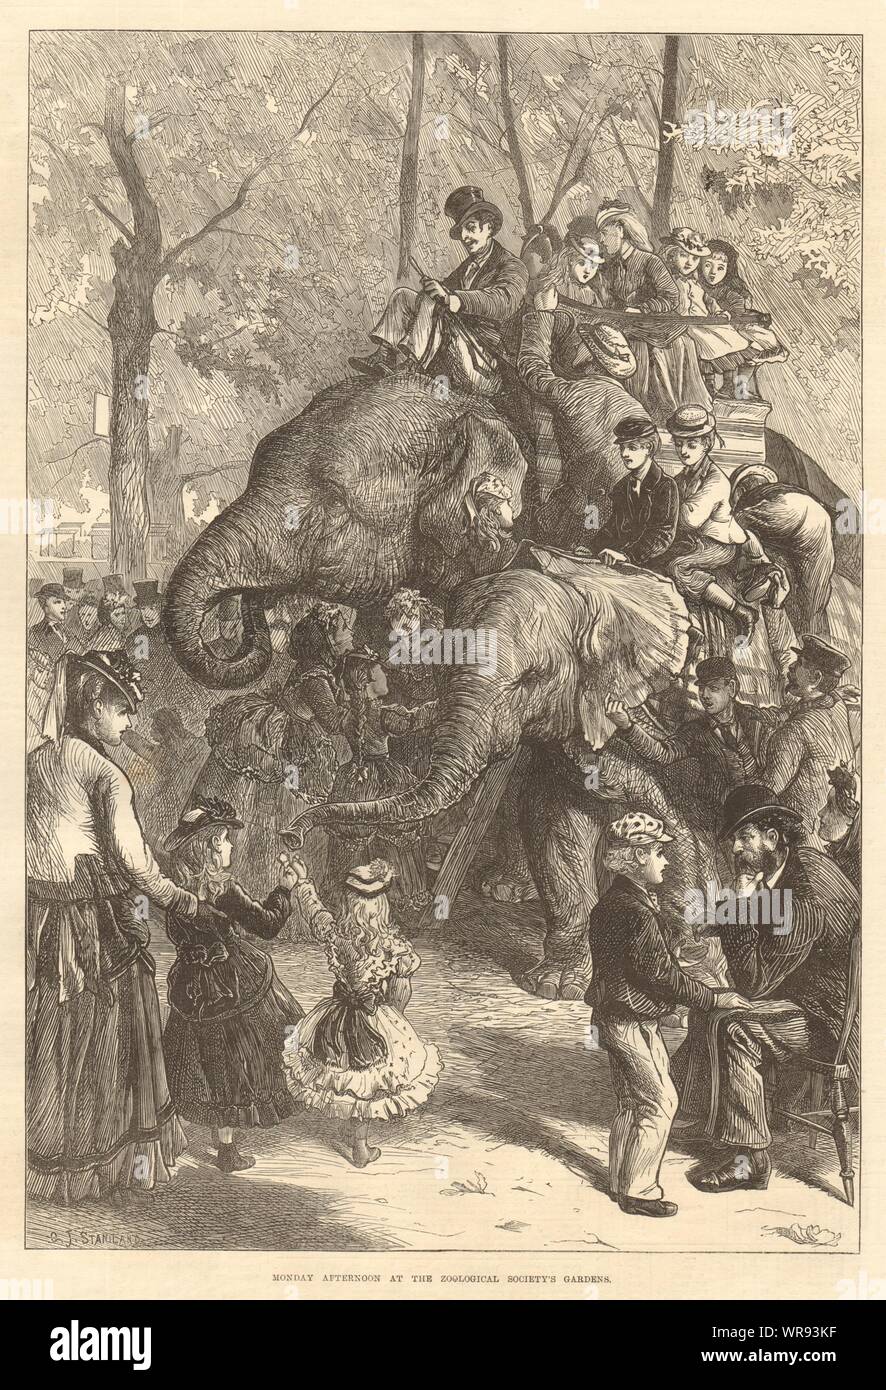 Monday afternoon at the Zoological Society's Gardens. London. Elephants 1871 Stock Photo